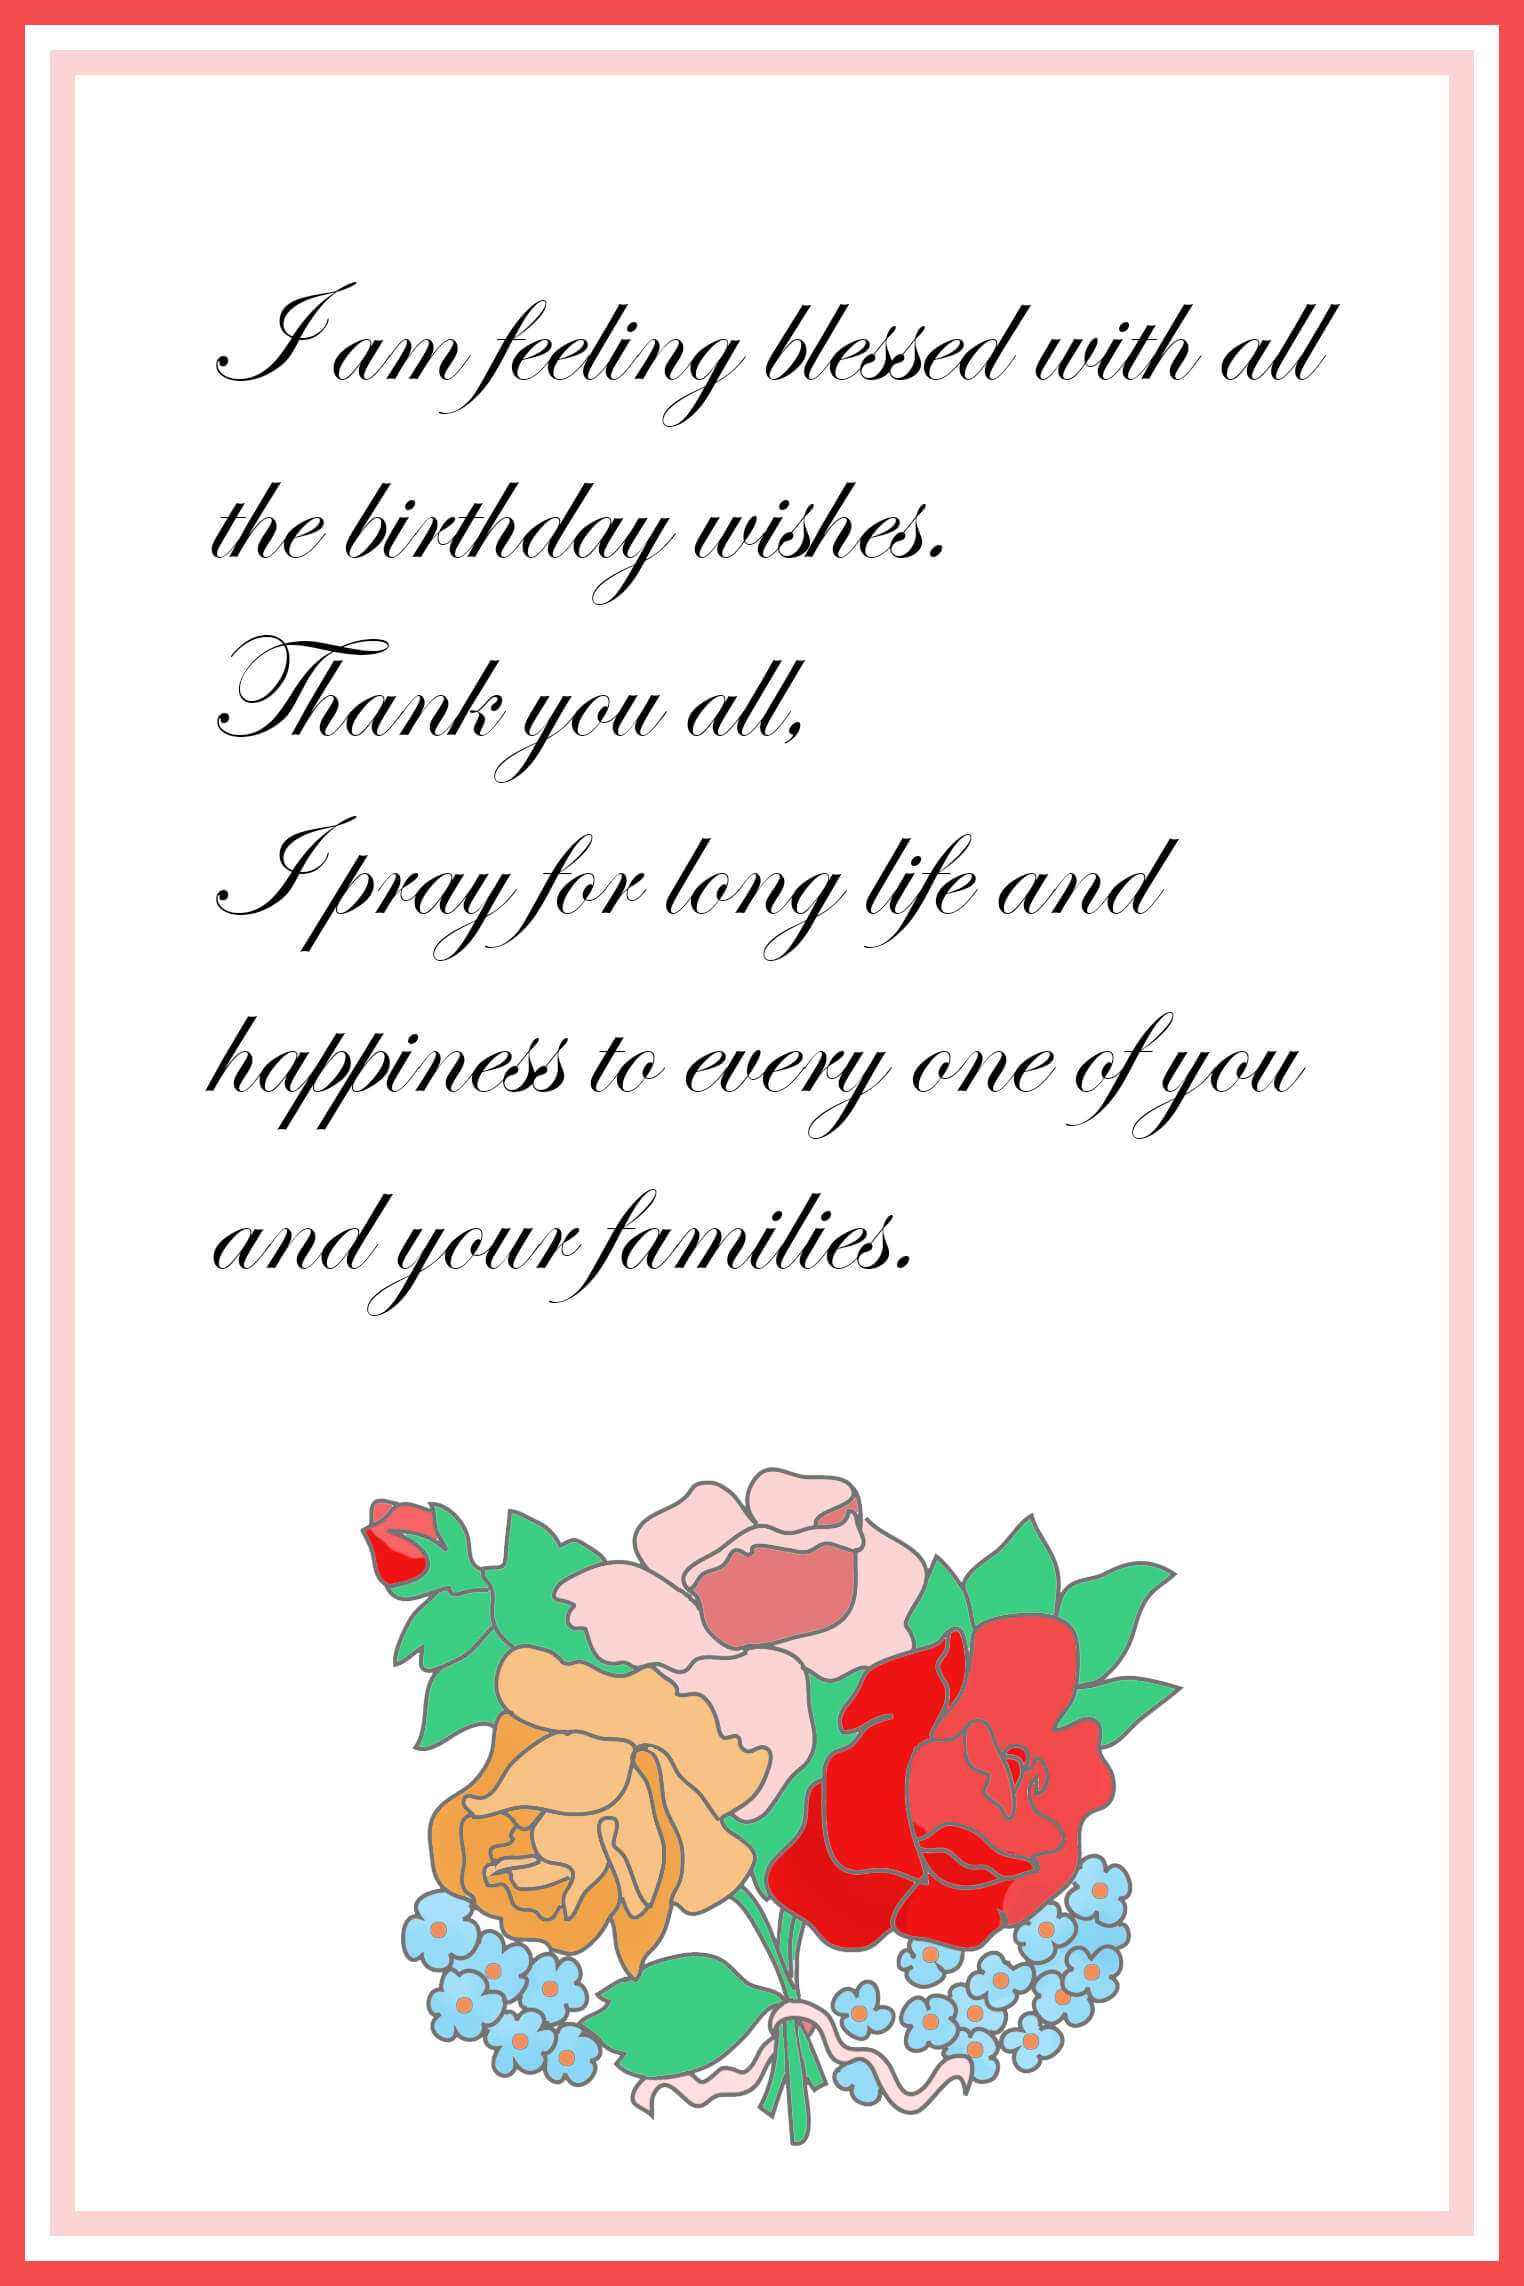 Printable Thank You Cards – Free Printable Greeting Cards Inside Christmas Thank You Card Templates Free